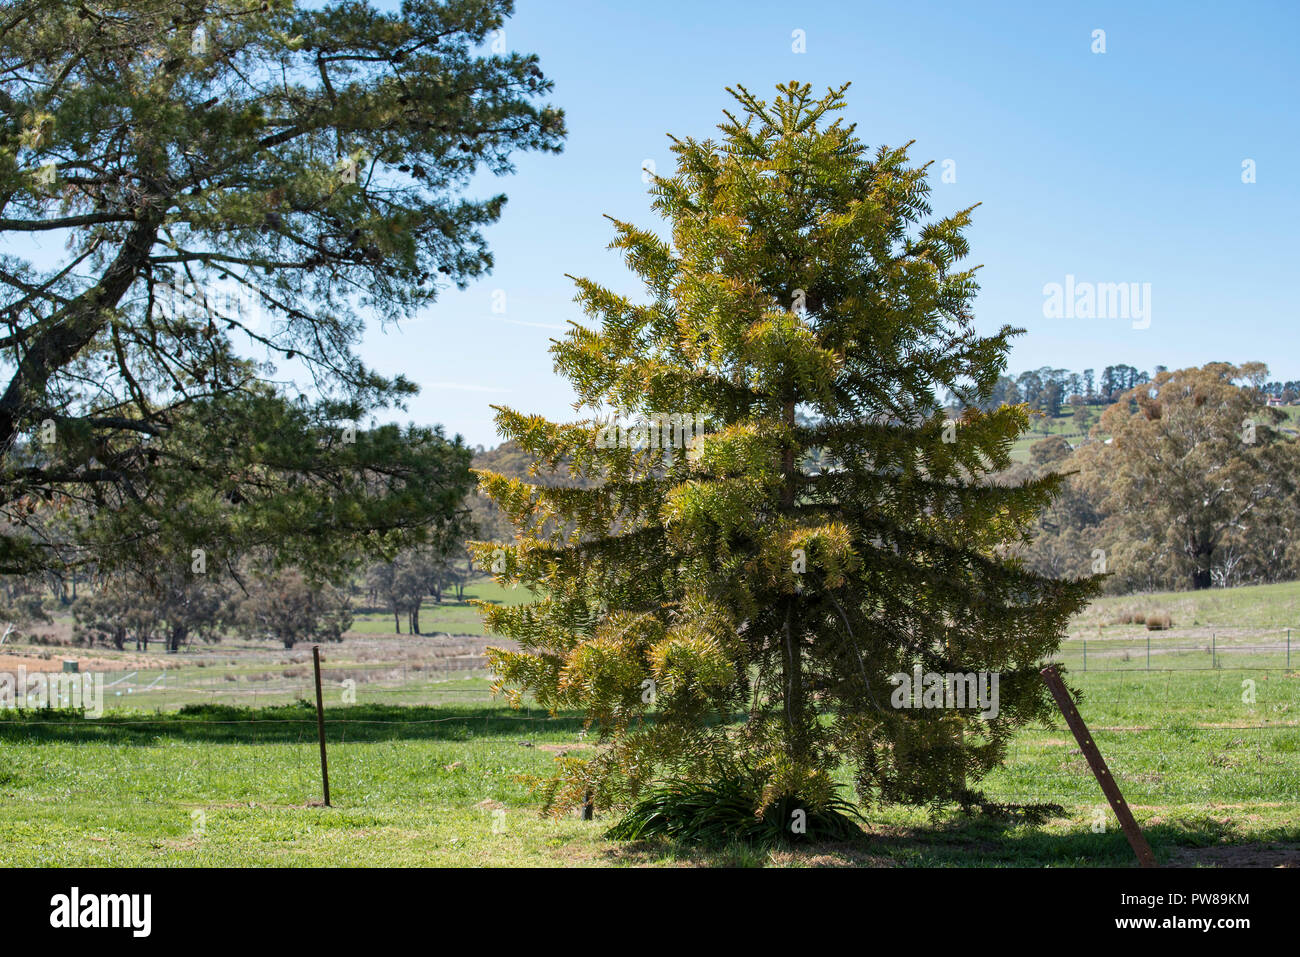 Grass paddocks and a young Bunya Pine (Araucaria bidwillii) tree planted in the foreground on a farm near Orange in New South Wales, Australia Stock Photo